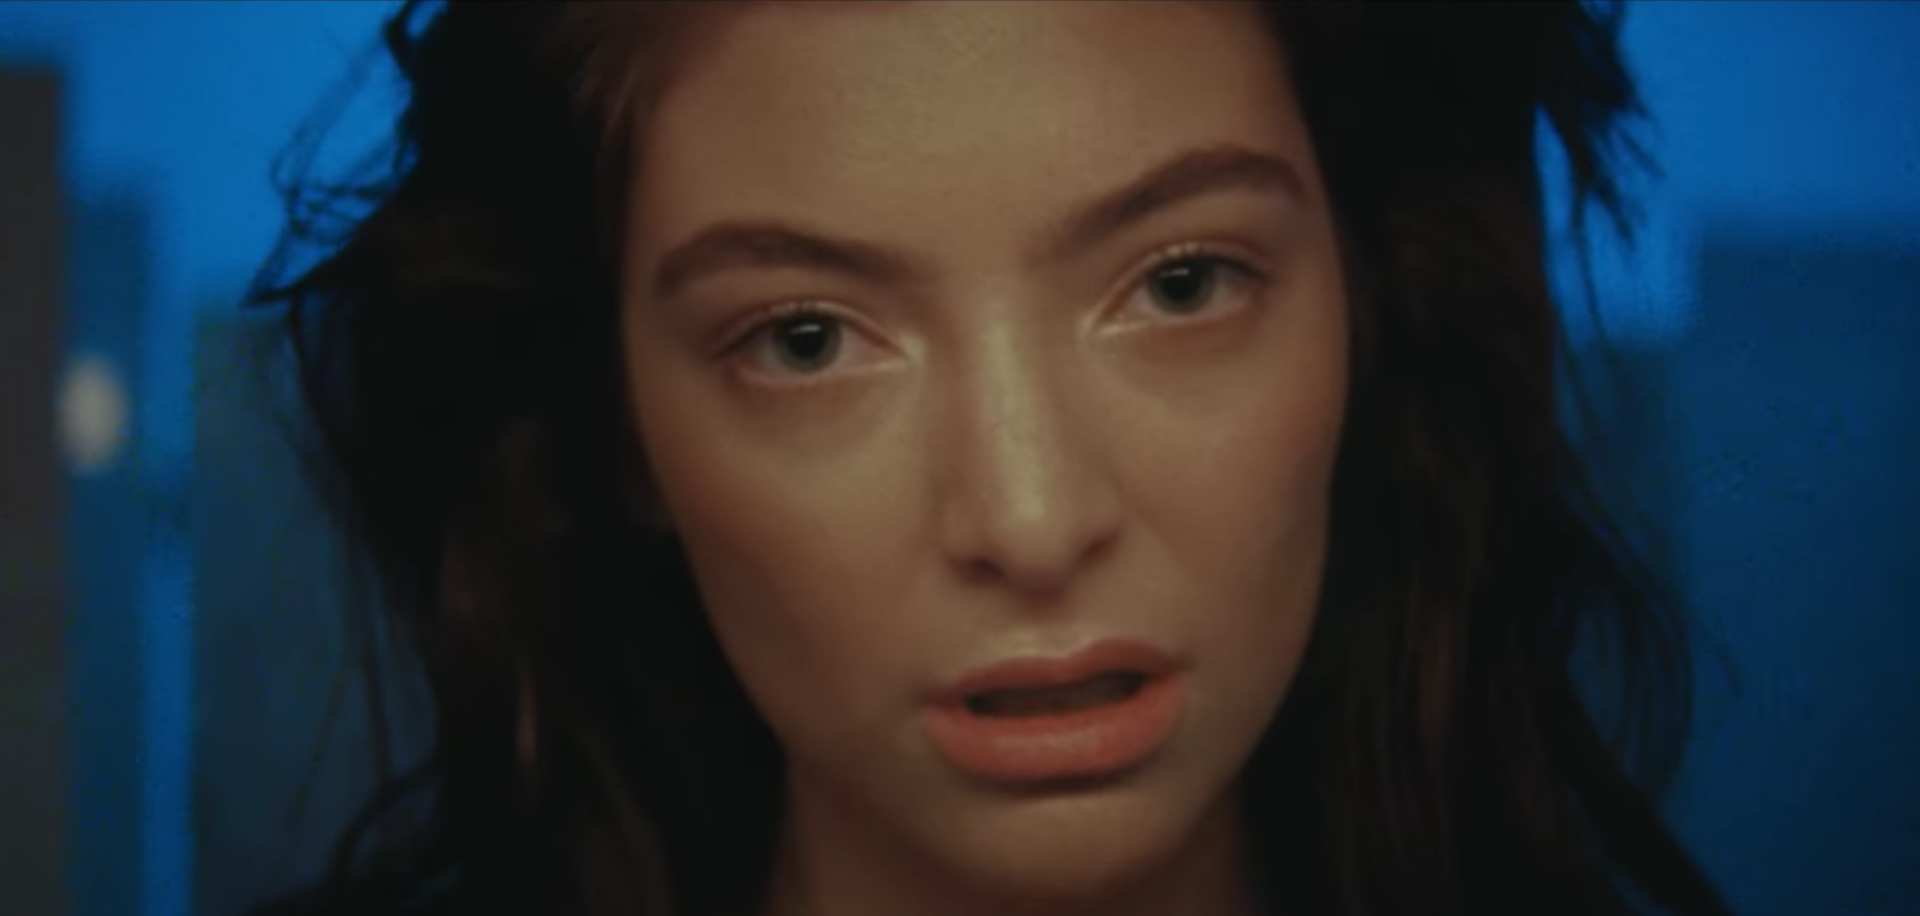 Lorde makes her triumphant return with “Green Light” video